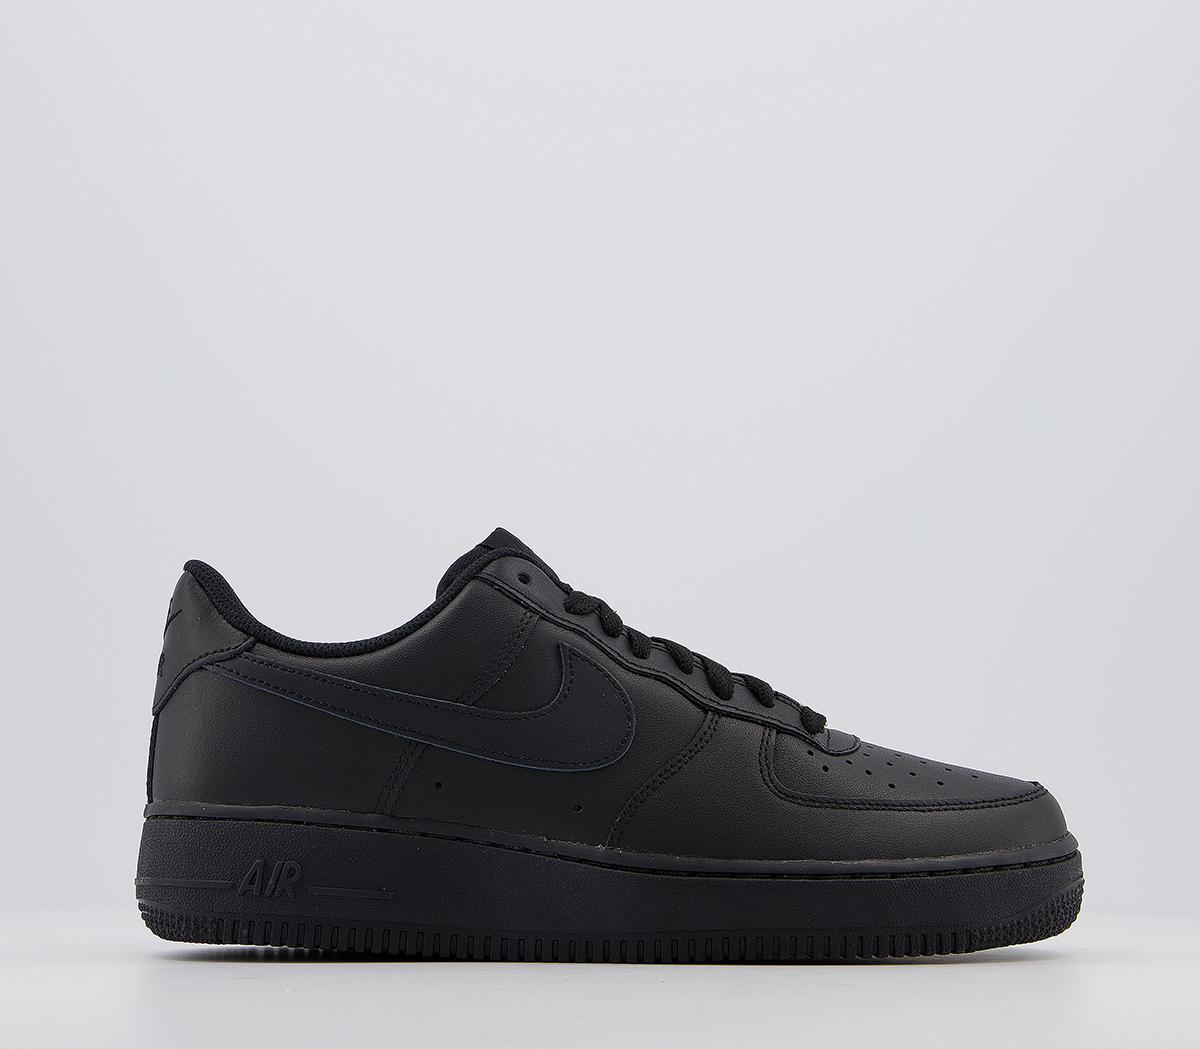 Nike Air Force 1 Trainers Black - Unisex Sports